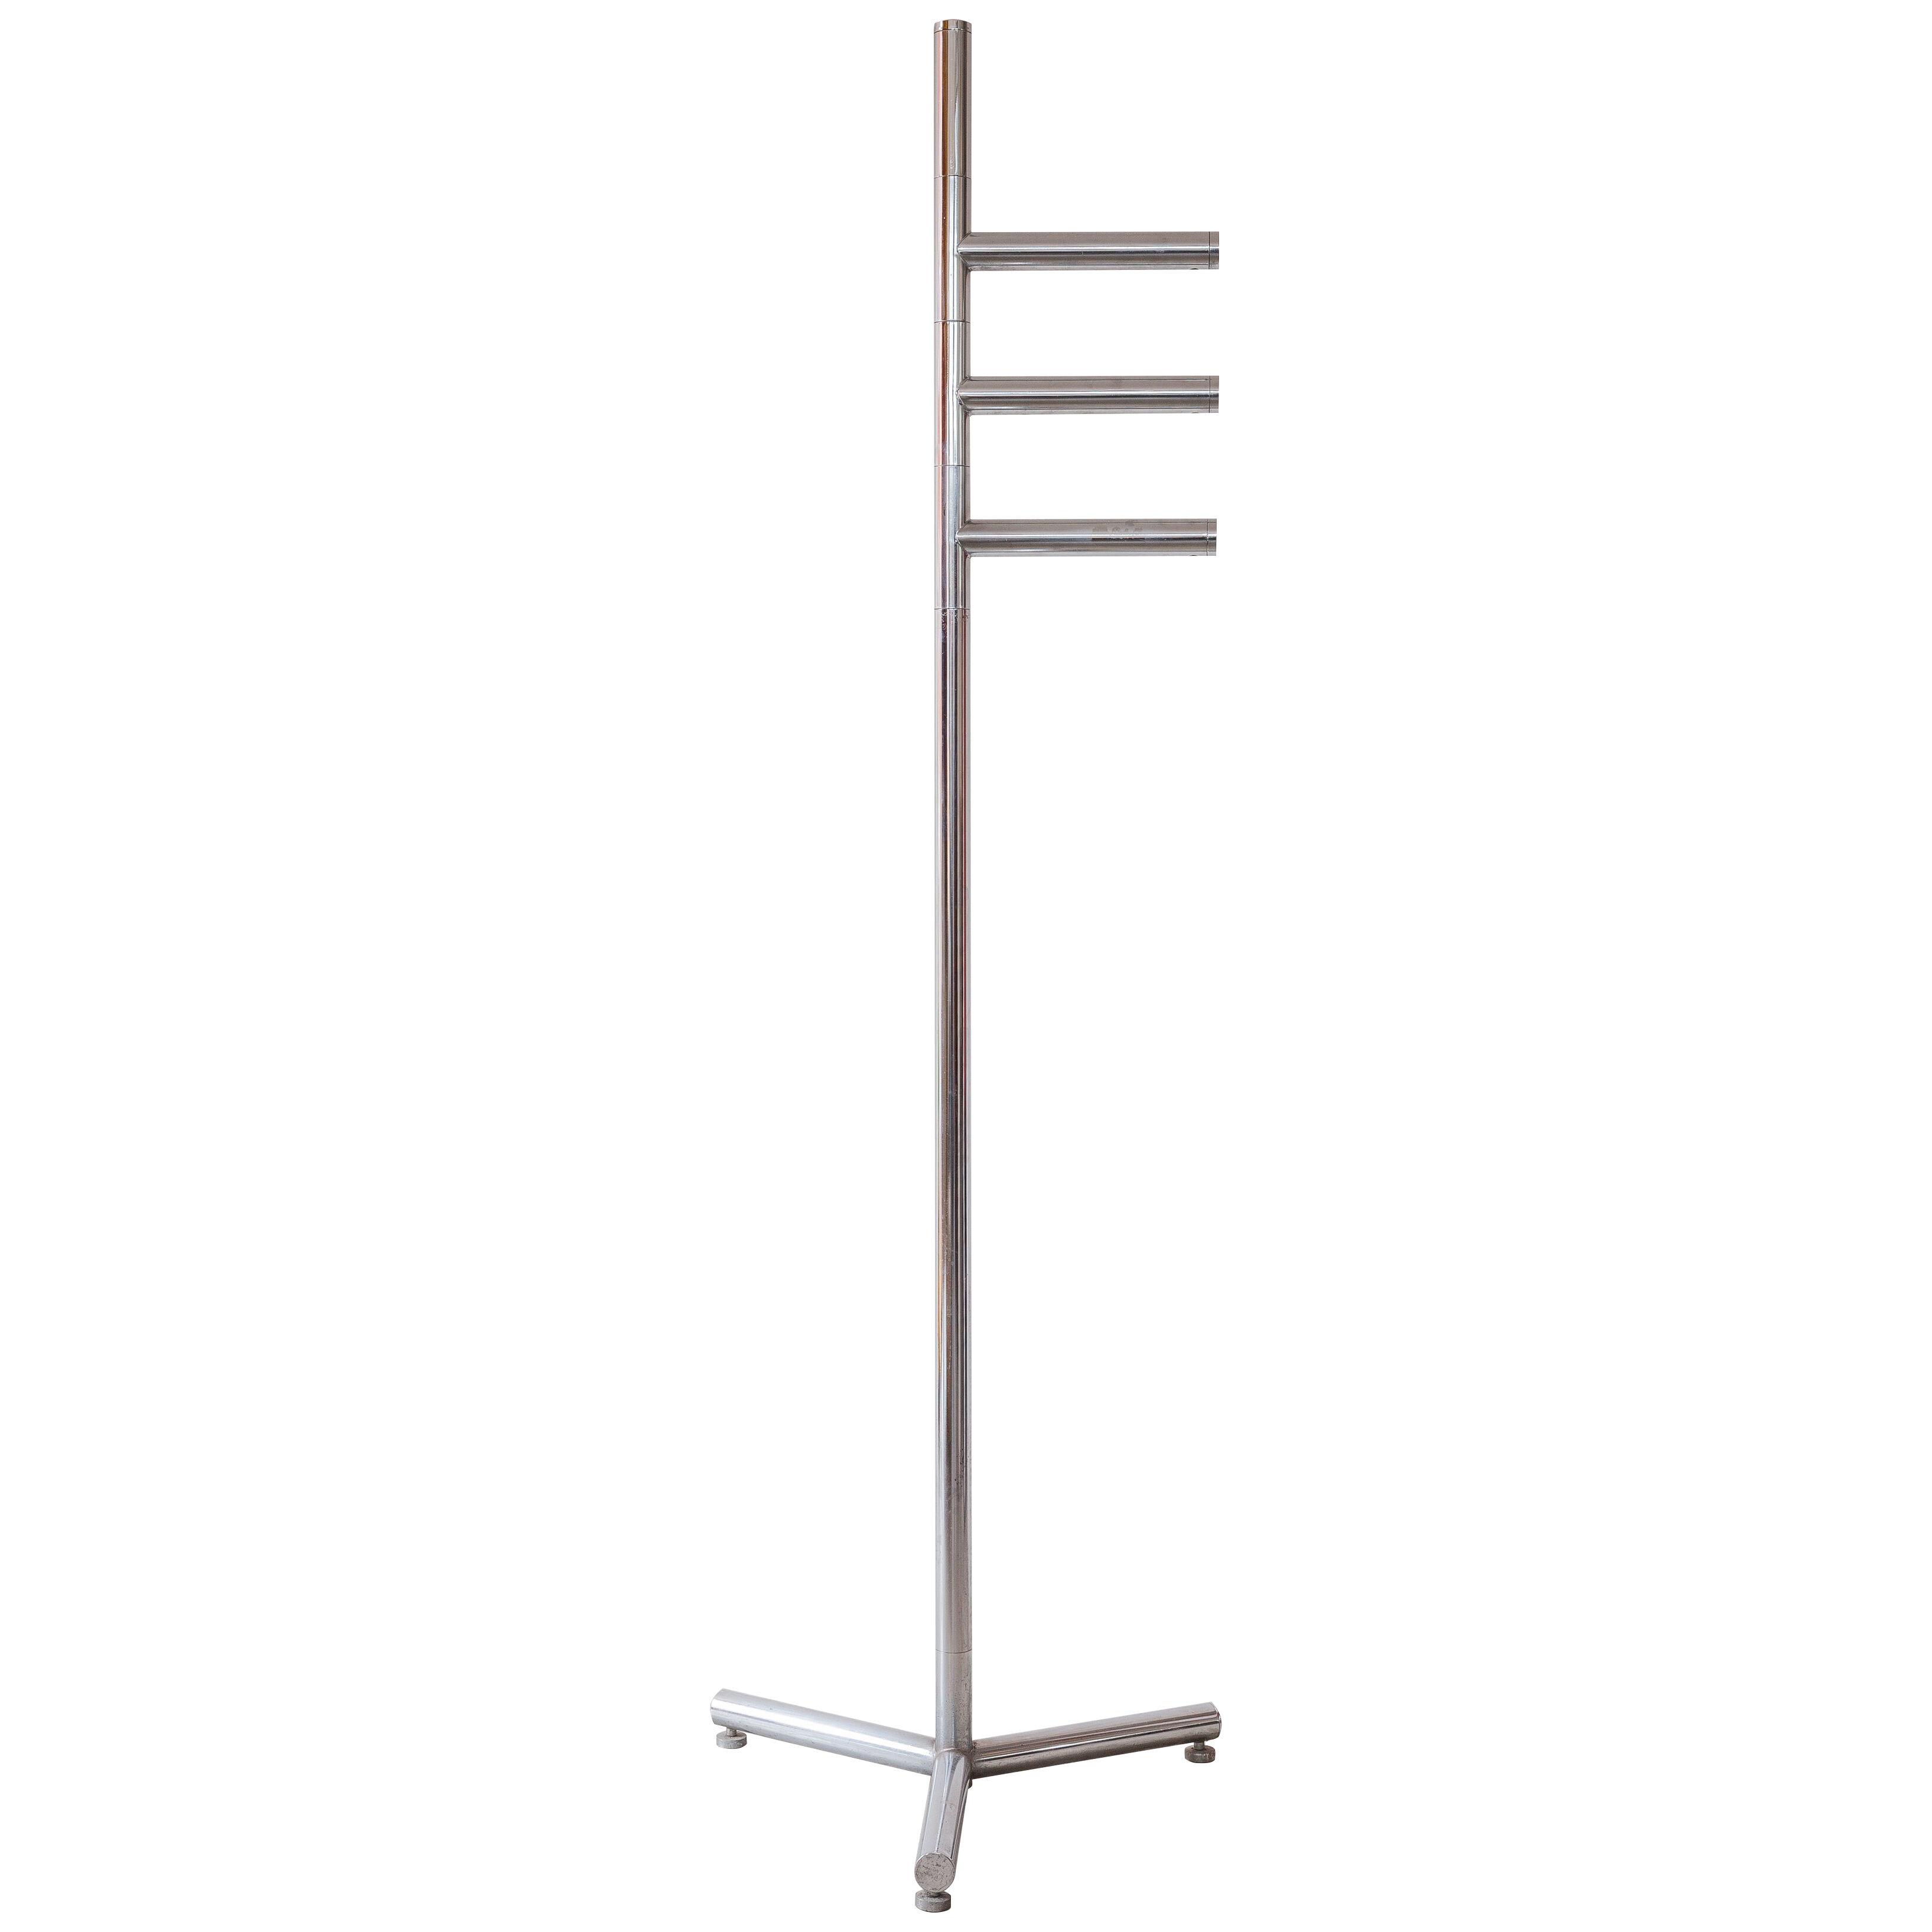 Minimalist Chrome Coat Rack with Three Adjustable Arms, Made in Belgium 1960s